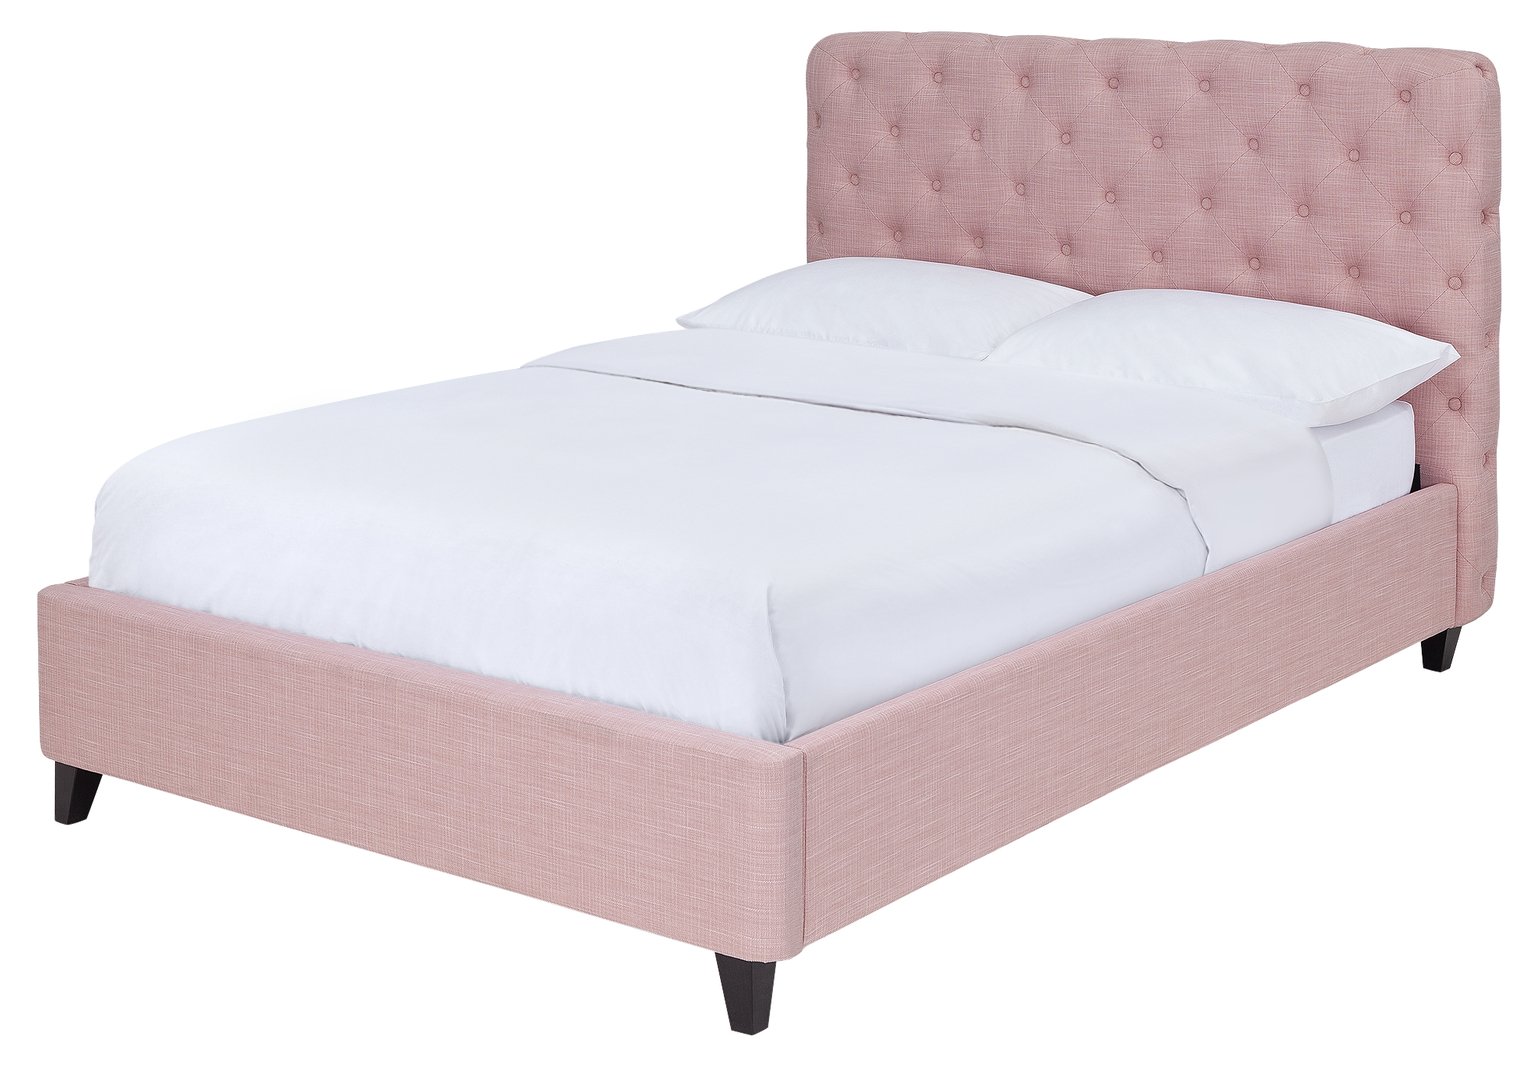 Argos Home Bouton Upholstered Double Bed Frame - Pink